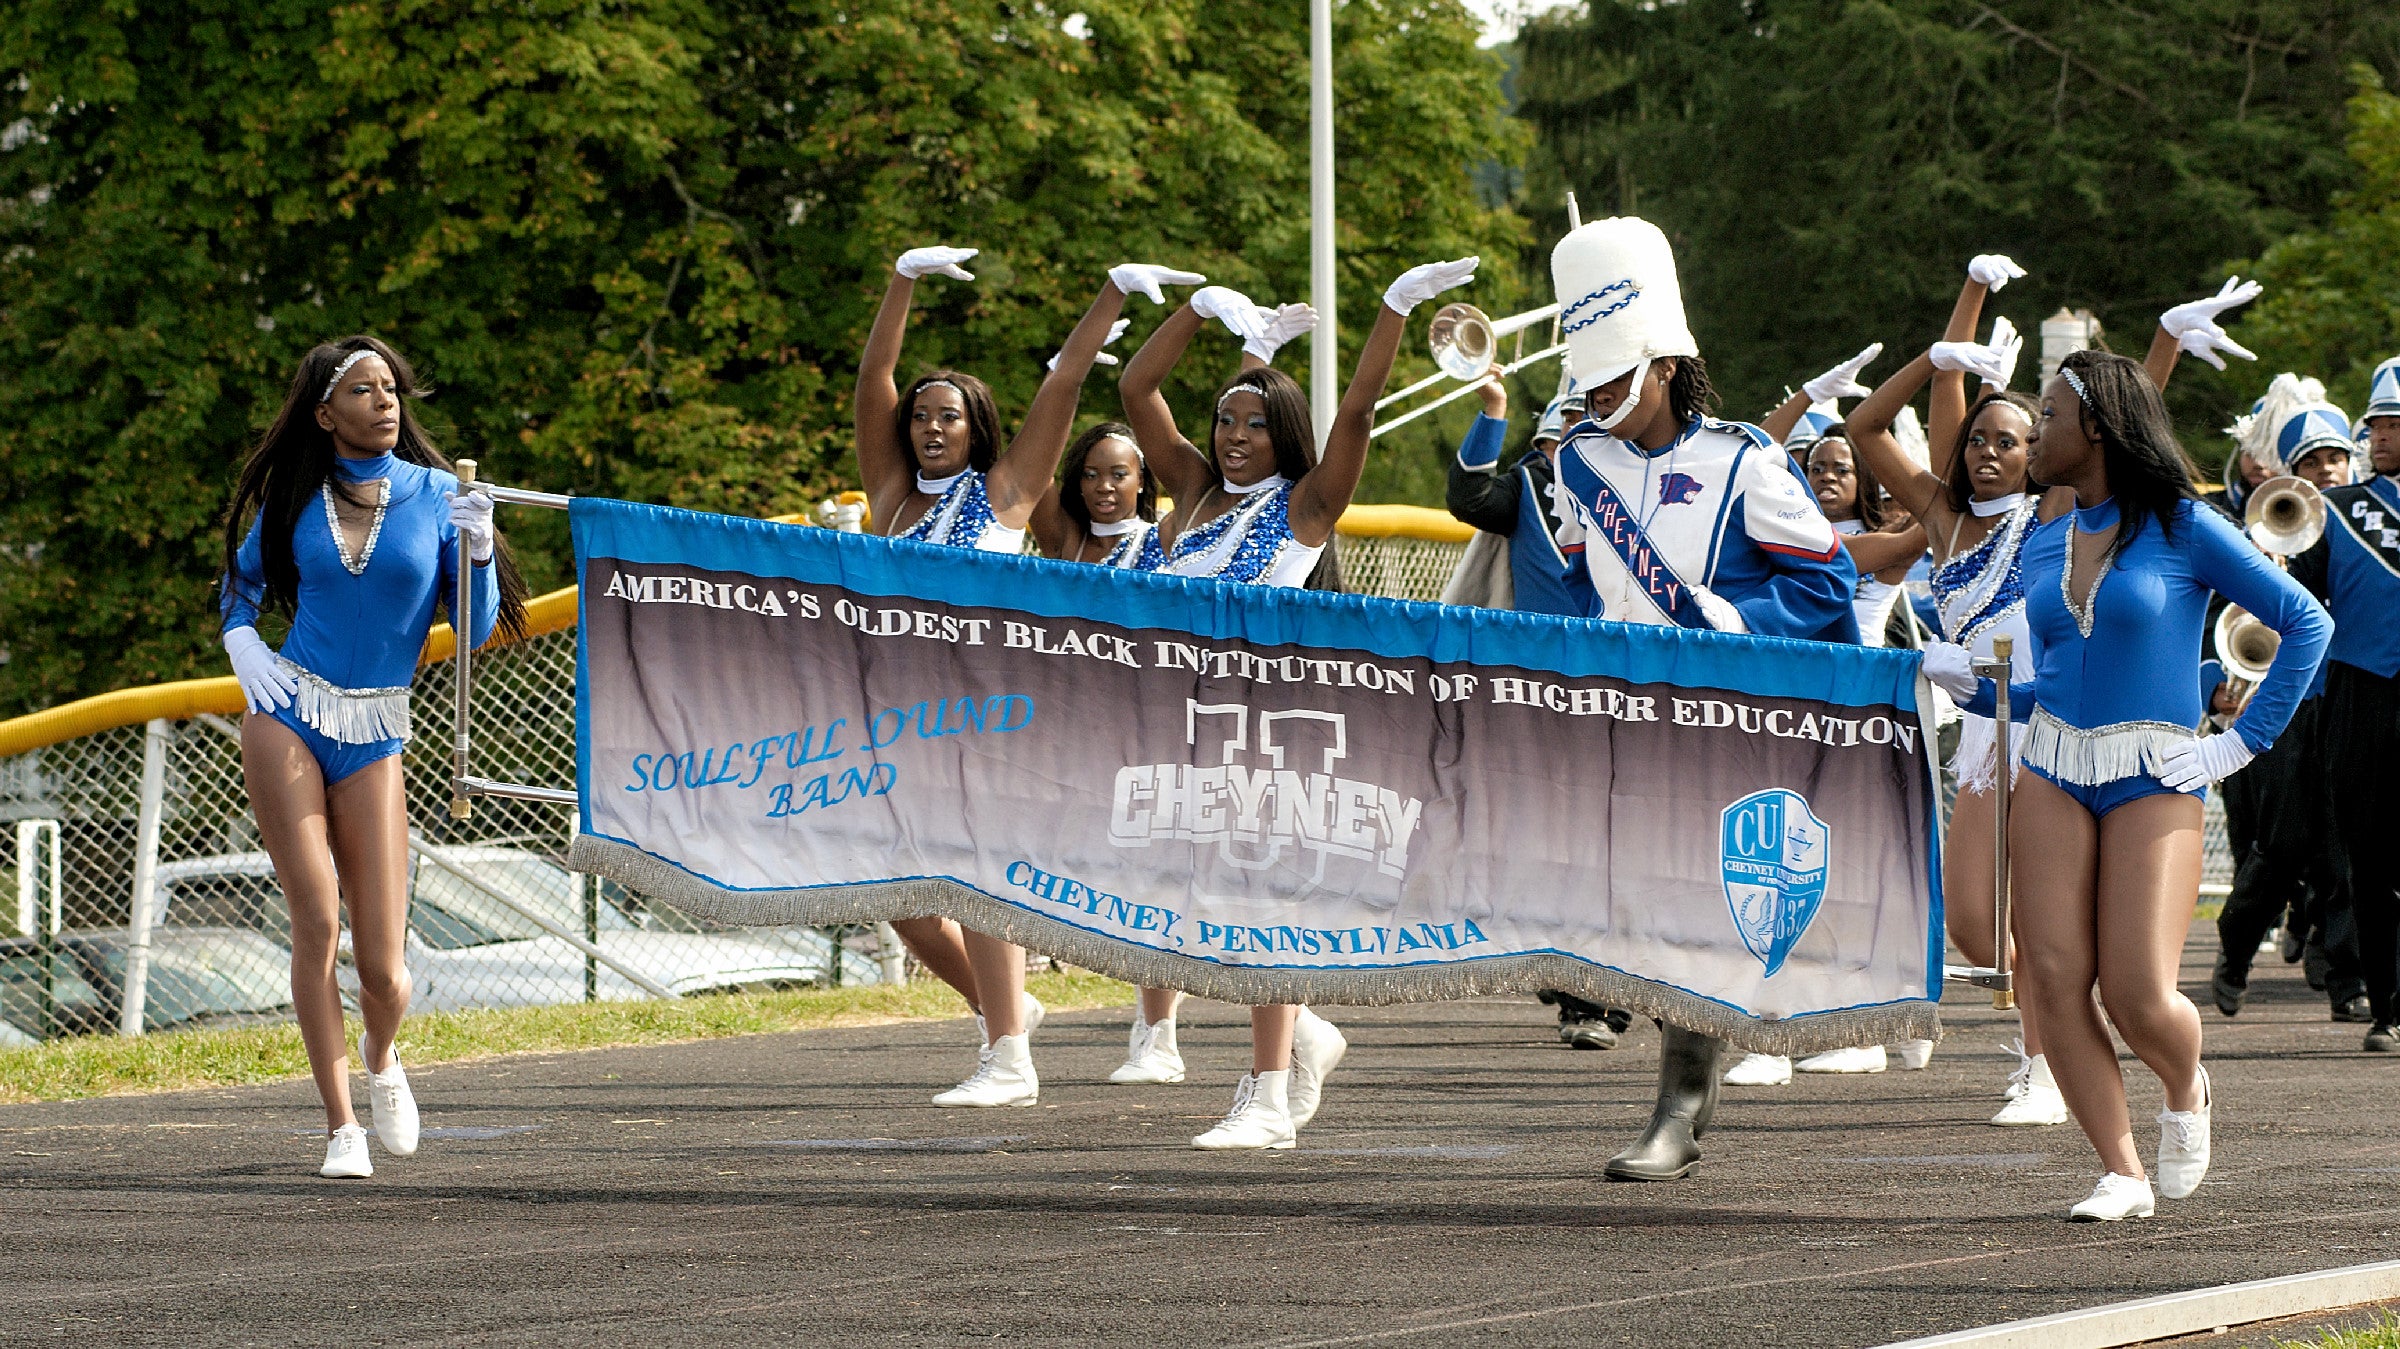  The cheer squad and marching band of Cheyney University take the field during half time at a football game against Lincoln University. (Bastiaan Slabbers/for NewsWorks) 